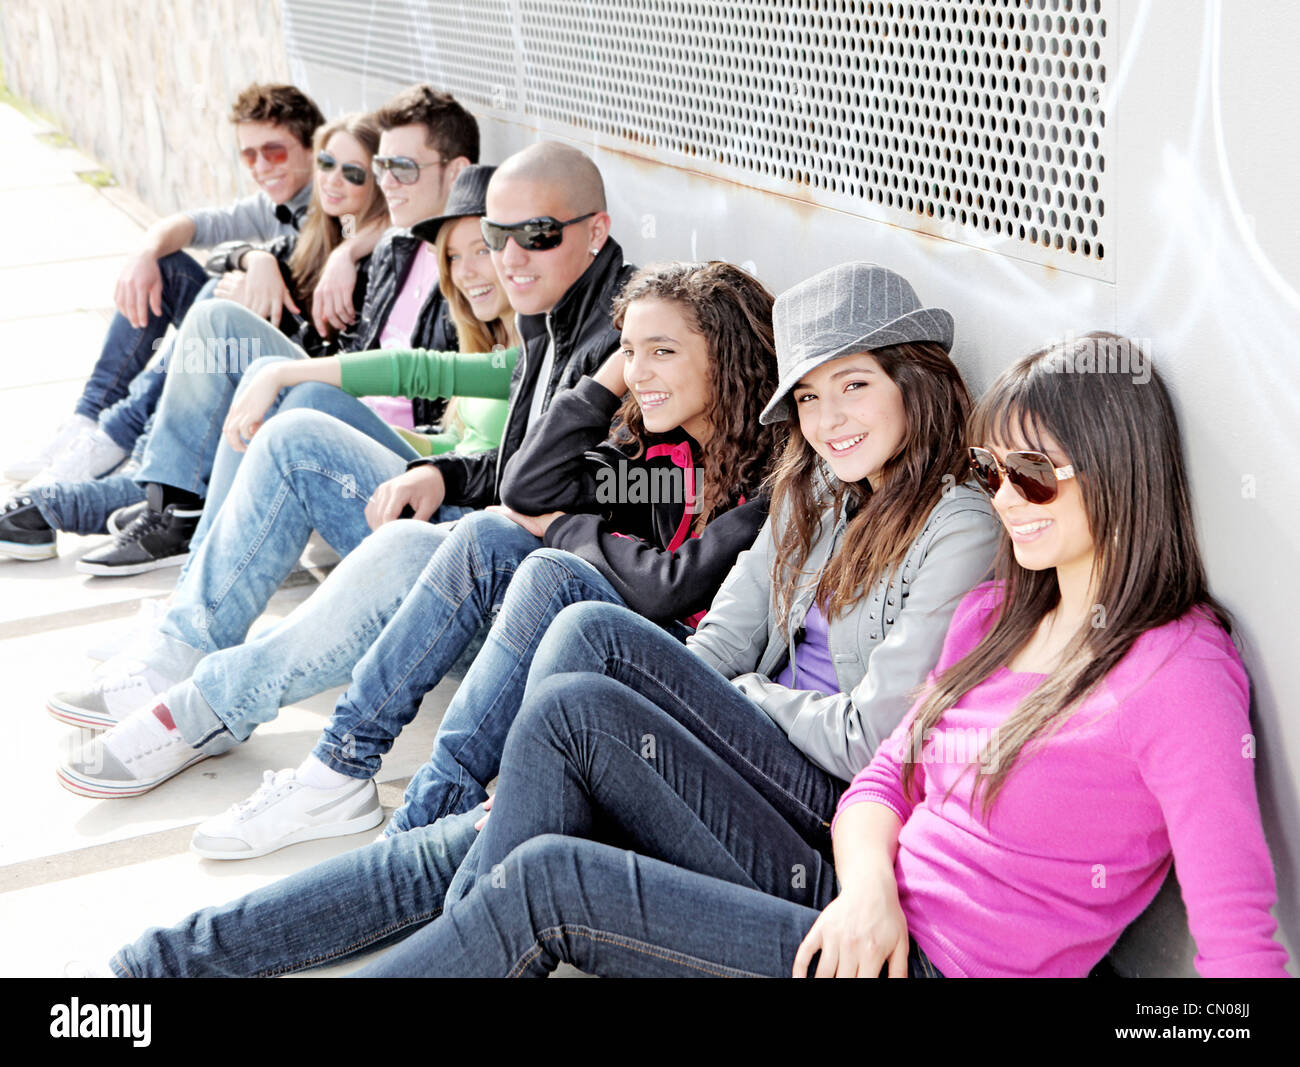 diverse group of teens or students on campus Stock Photo